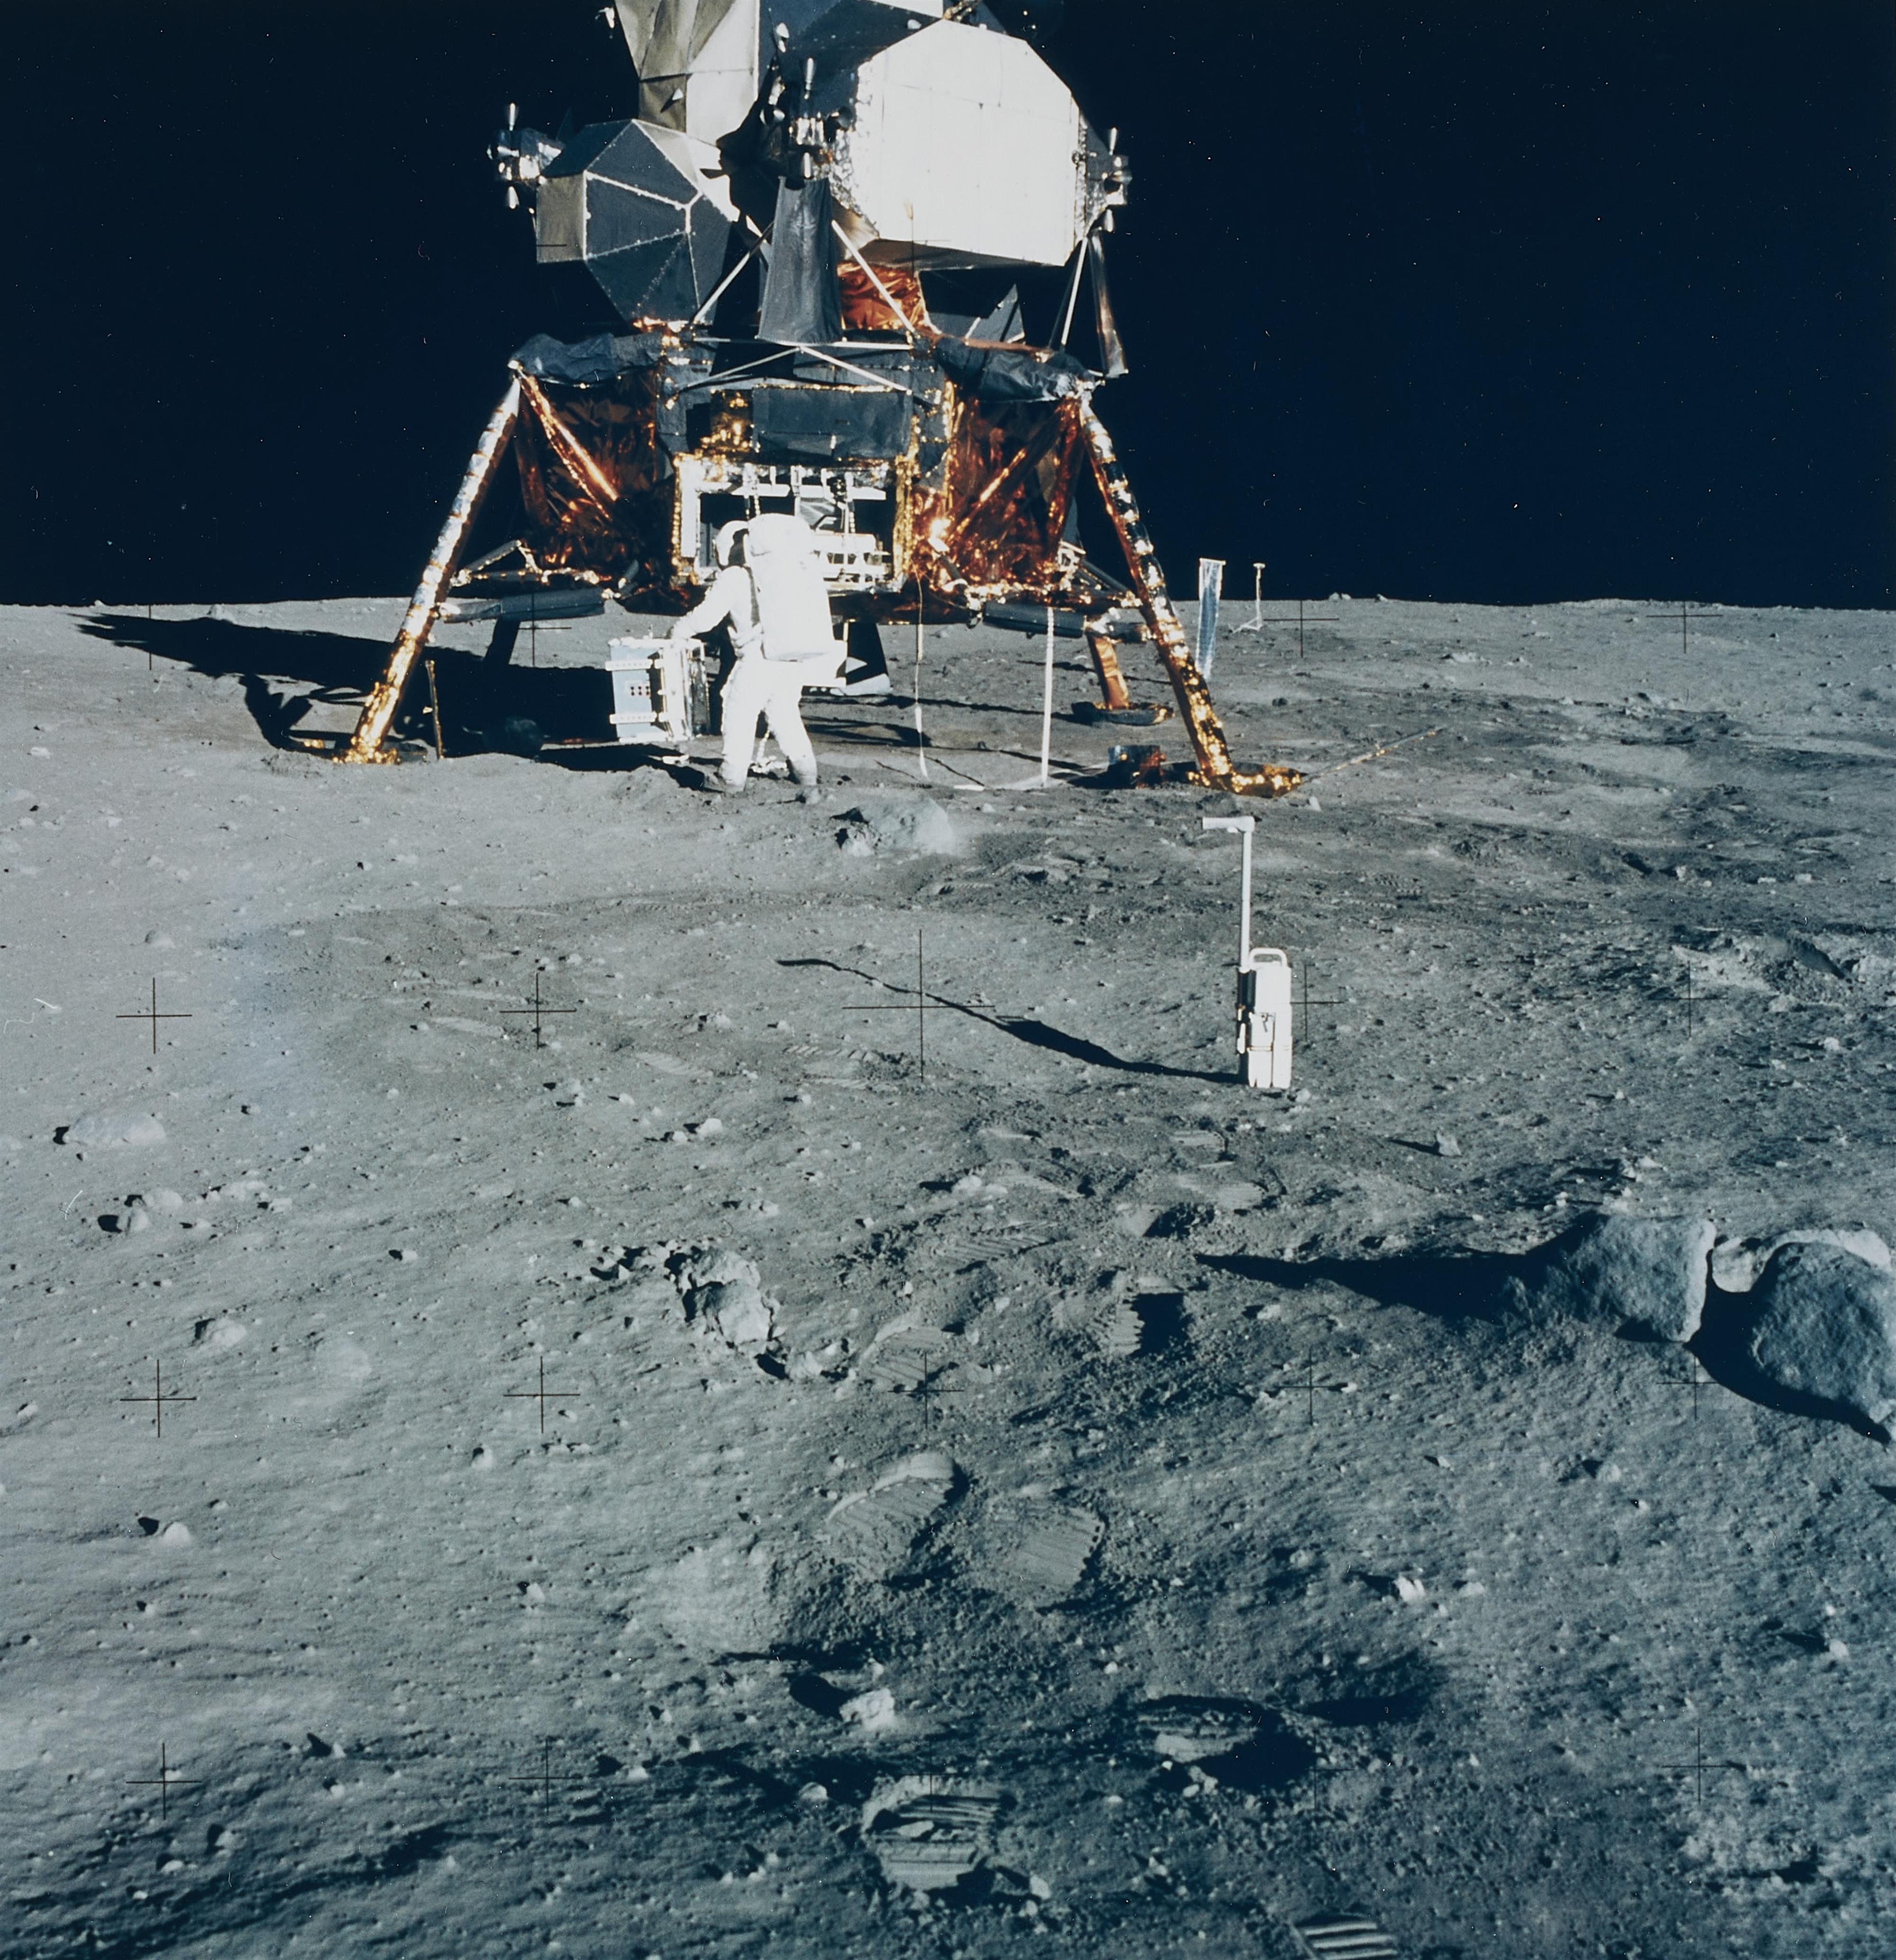 NASA - Astronaut Edwin E. Aldrin Jr. prepares to deploy the Early Apollo Scientific Experiments Package on the surface of the Moon, Apollo 11 - image-1